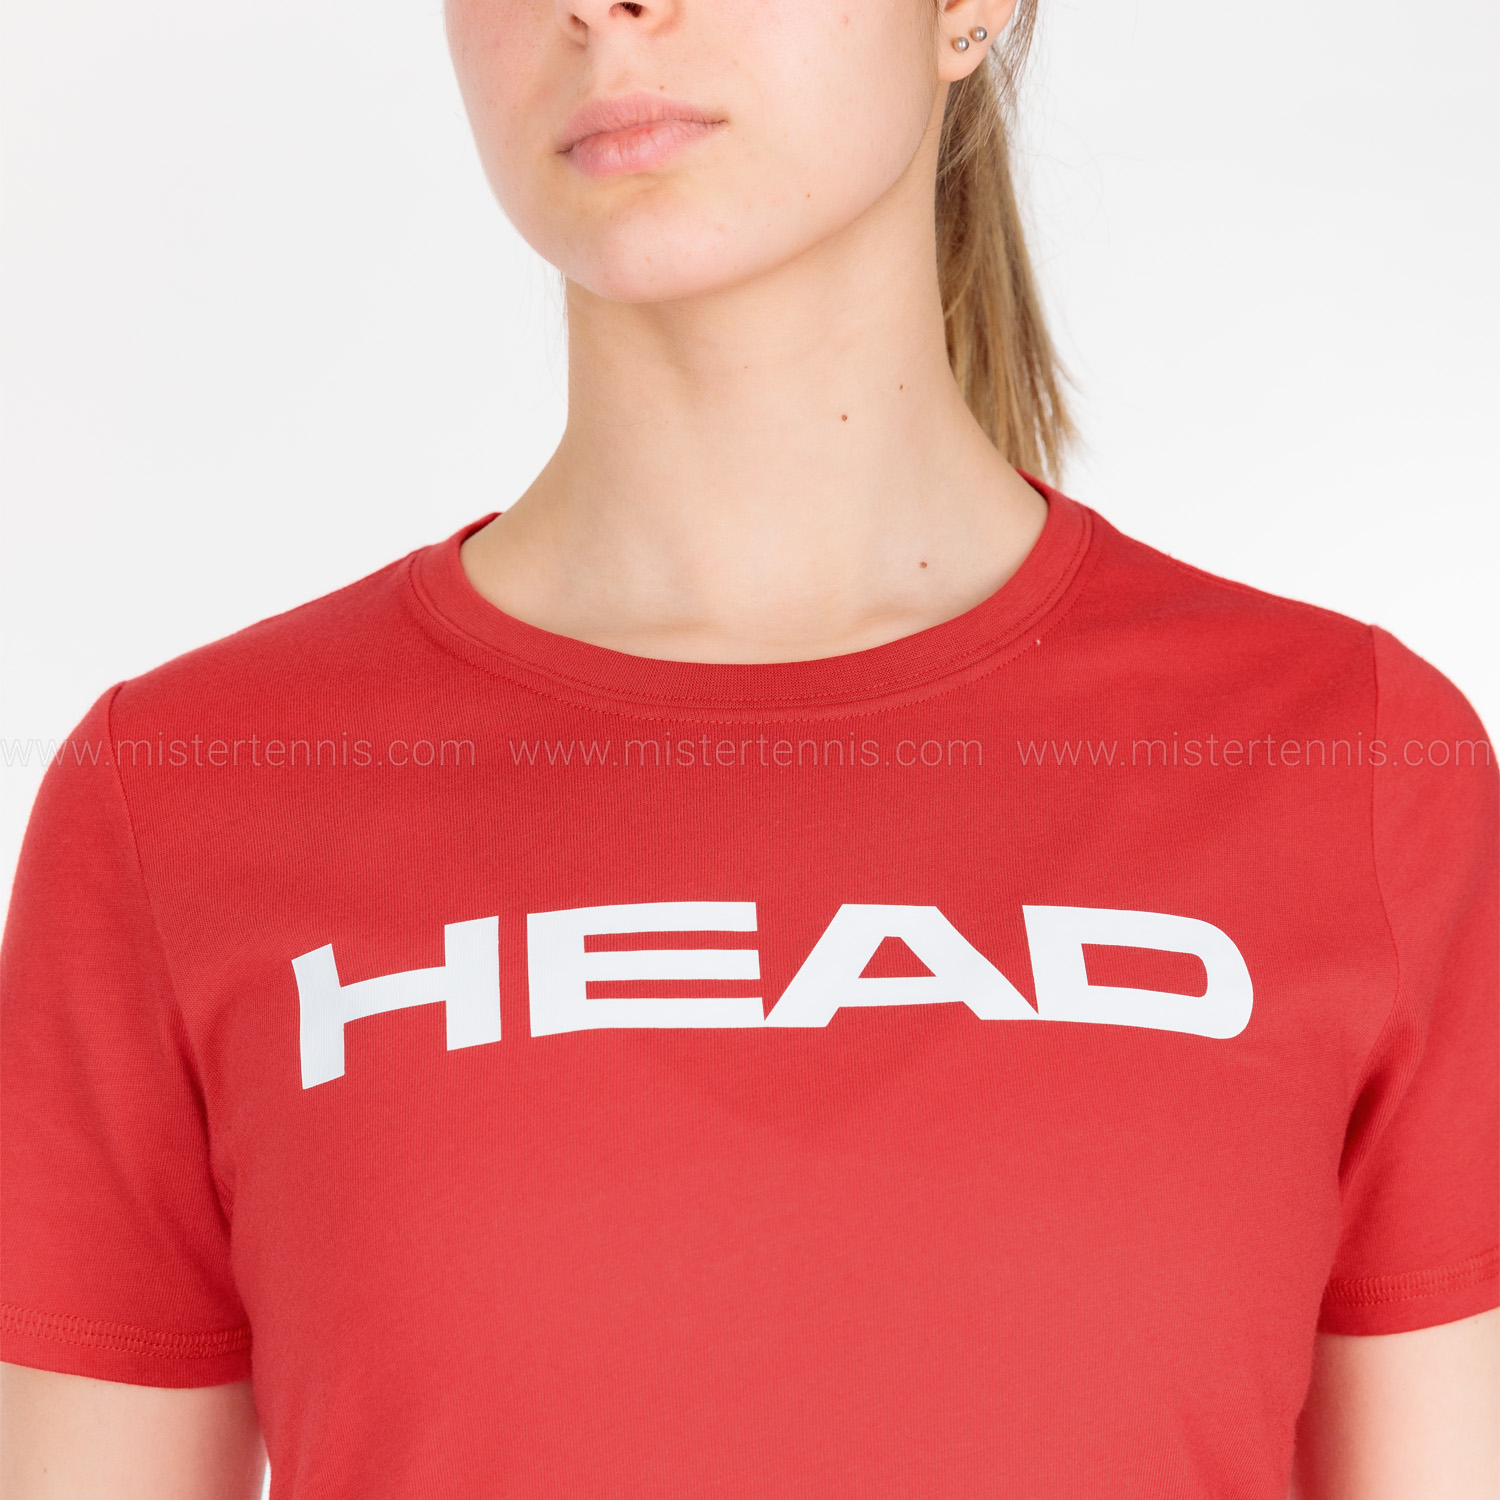 Head Club Lucy T-Shirt - Red